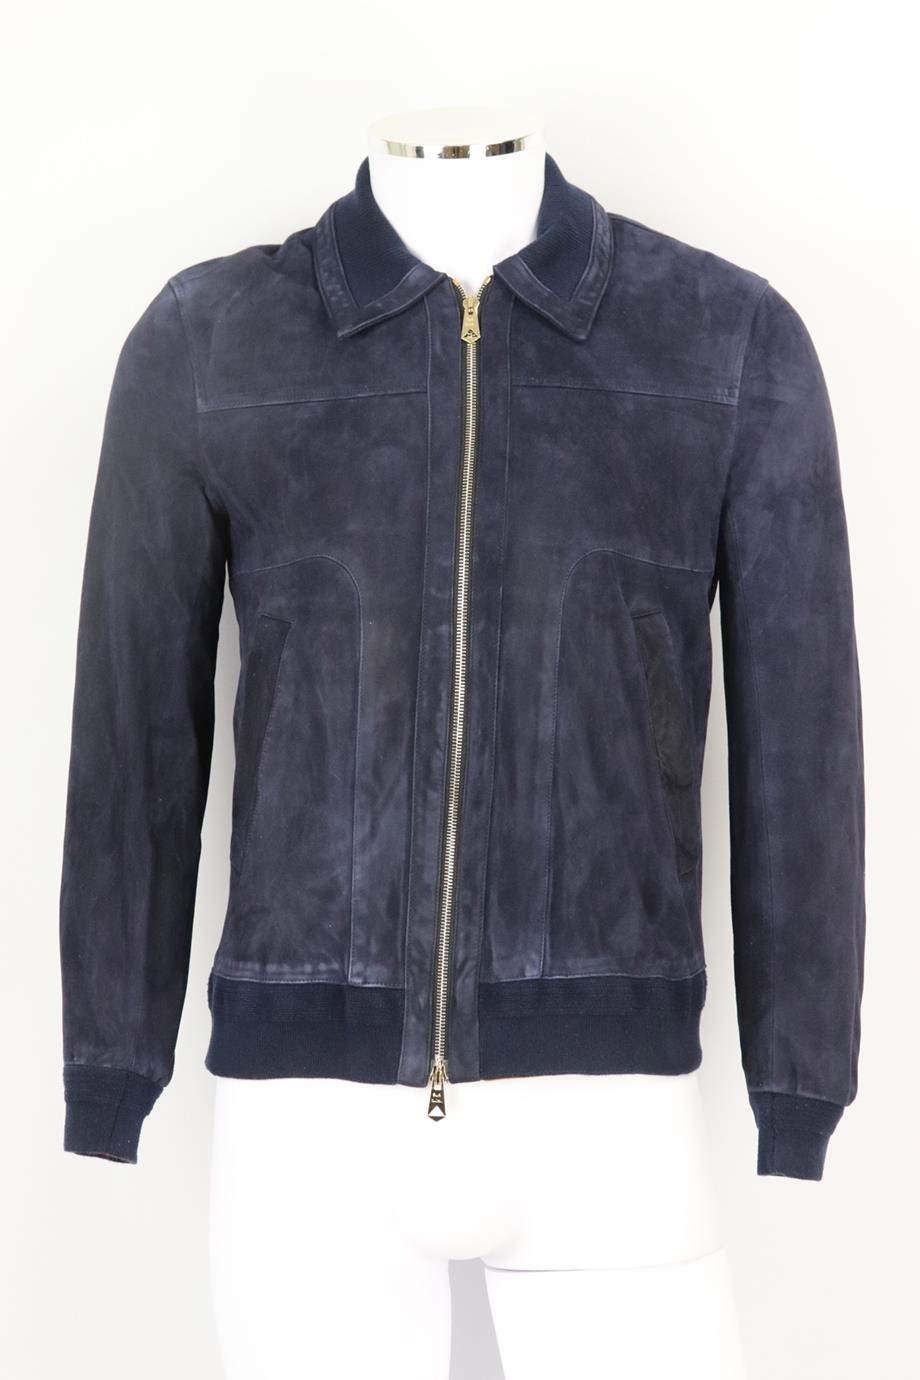 Paul Smith men's suede jacket. Blue. Long sleeve, crewneck. Zip fastening at front. 100% Leather; lining: 100% cupro. Size: XSmall (IT 44, EU 44 UK/US Chest 34). Shoulder to shoulder: 16 in. Bust 37 in. Waist: 37 in. Hips: 36 in. Length: 25 in. Very